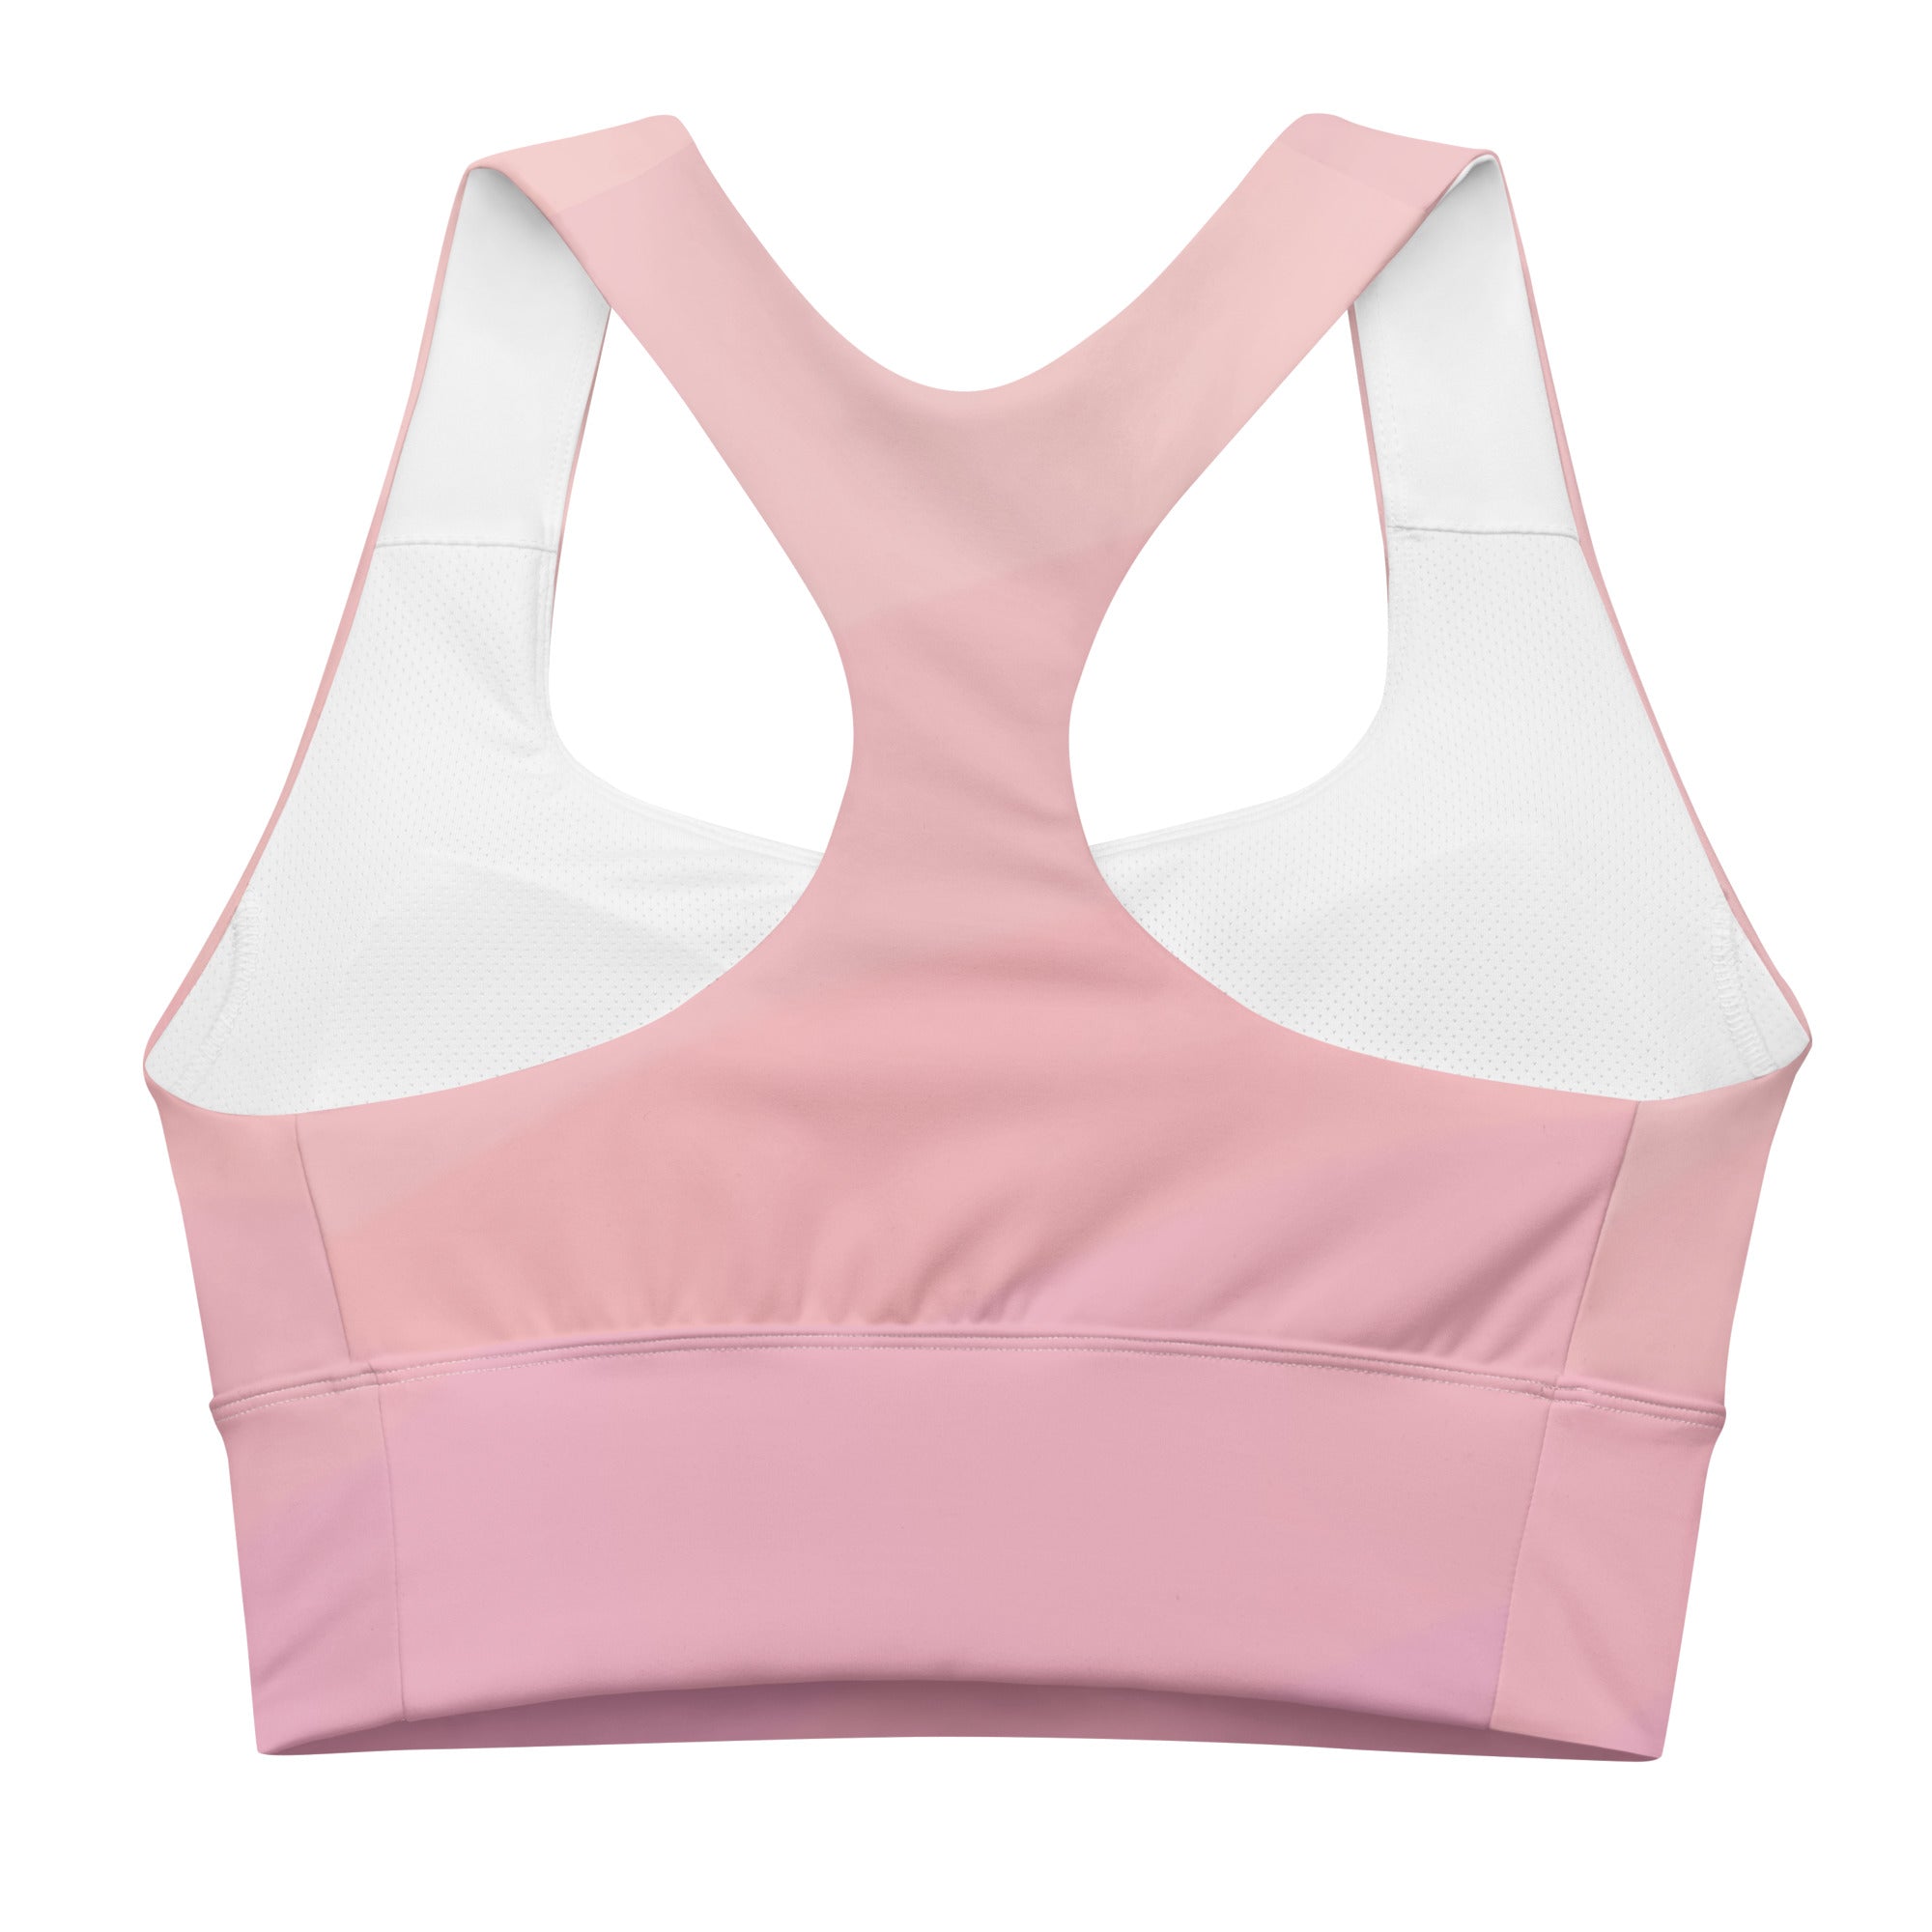 Designed to provide maximum support and style, this sports bra features a flattering long-line silhouette in a soft blush pink hue, perfect for adding a touch of elegance to your activewear collection. 